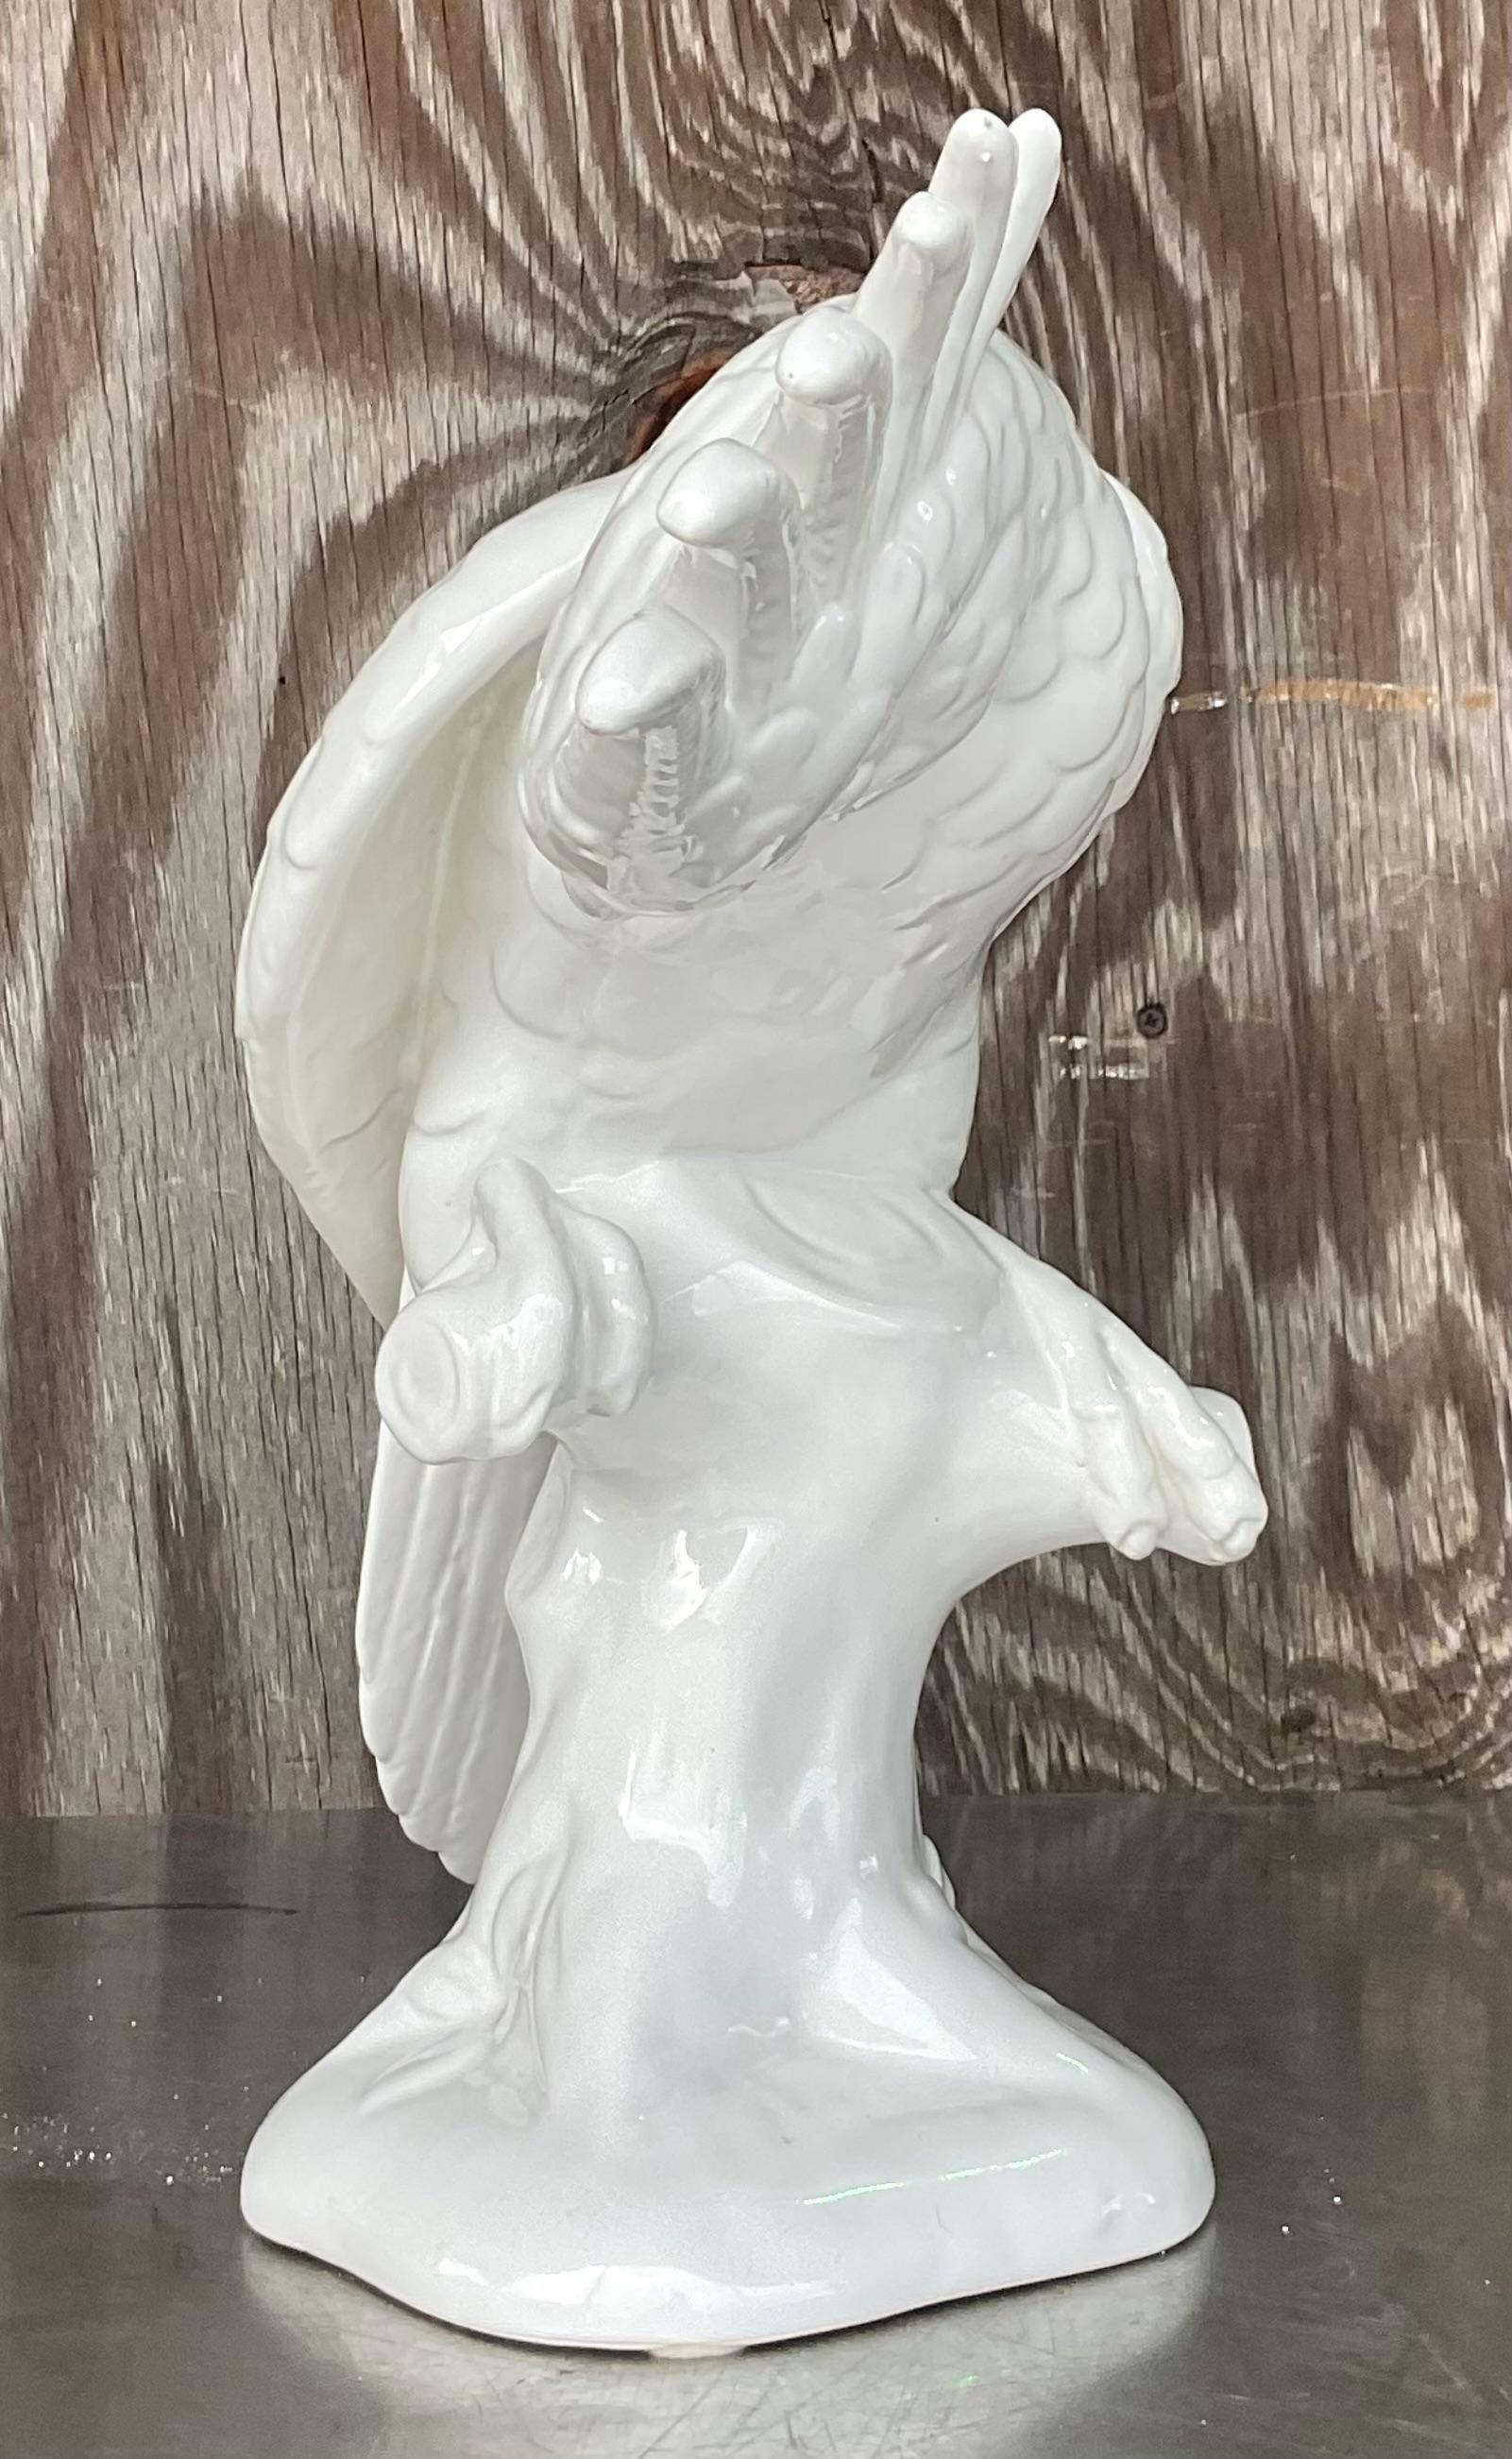 A fantastic vintage Regency large Cockatoo. A chic Blanc de Chine bird in a beautiful low pose. Made in Italy and marked on the bottom. Acquired from a Palm Beach estate.